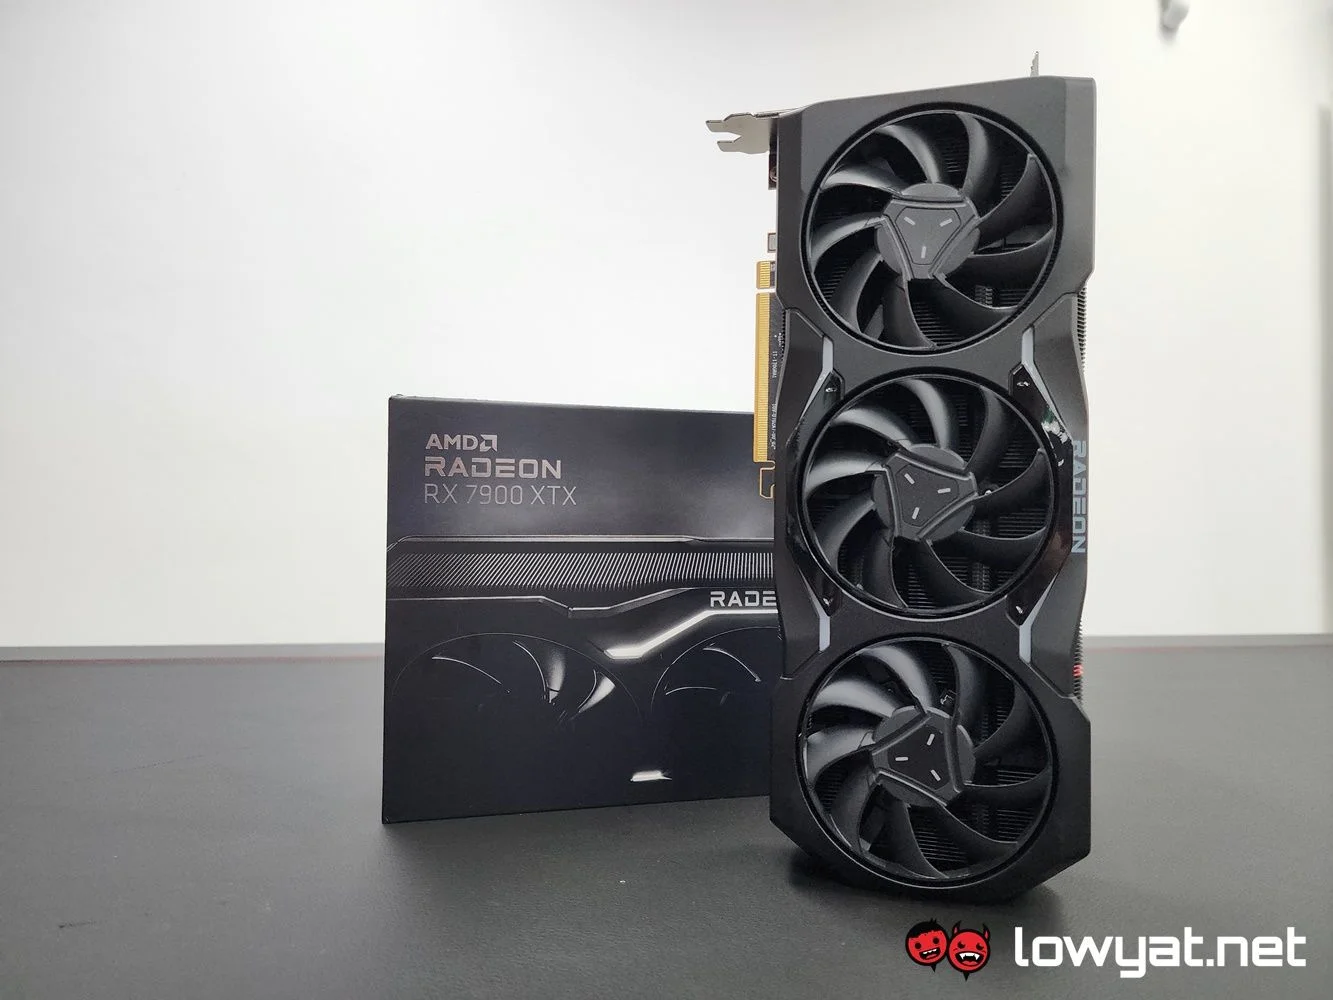 AMD Radeon RX 7900 Series Retailing Locally From RM4699 - 15